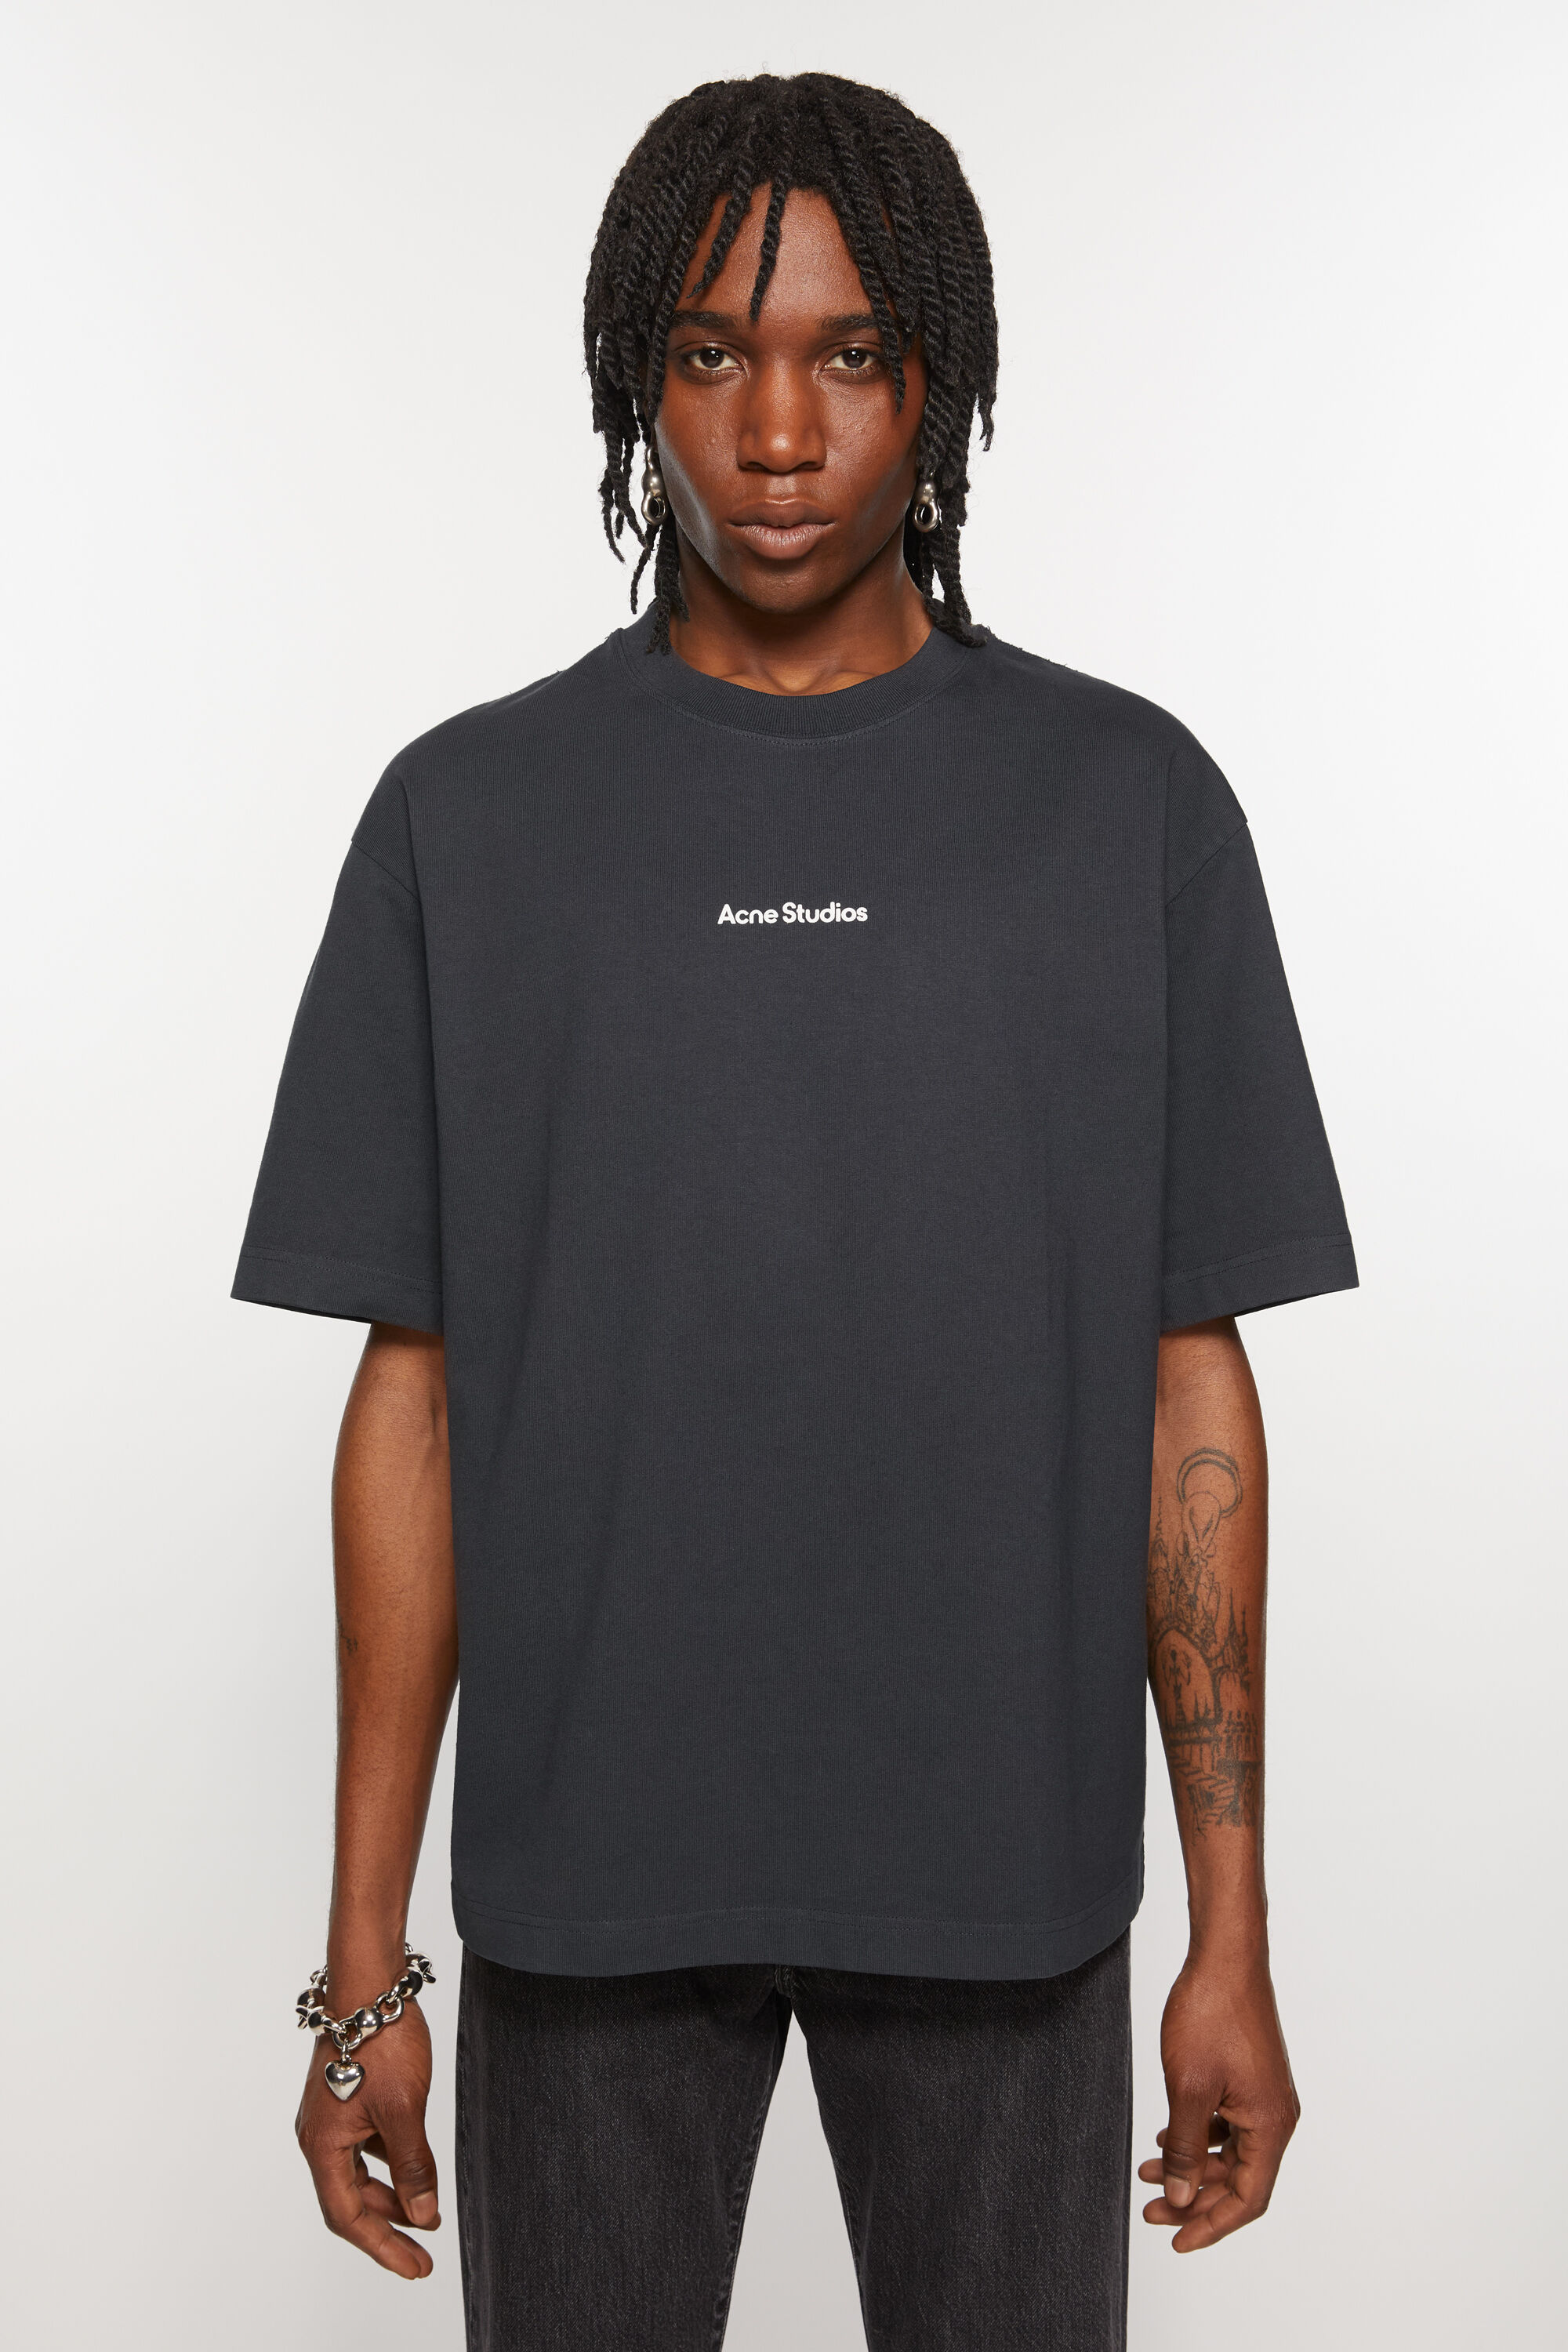 Acne Studios - T-shirt stamp logo - Relaxed fit - Black